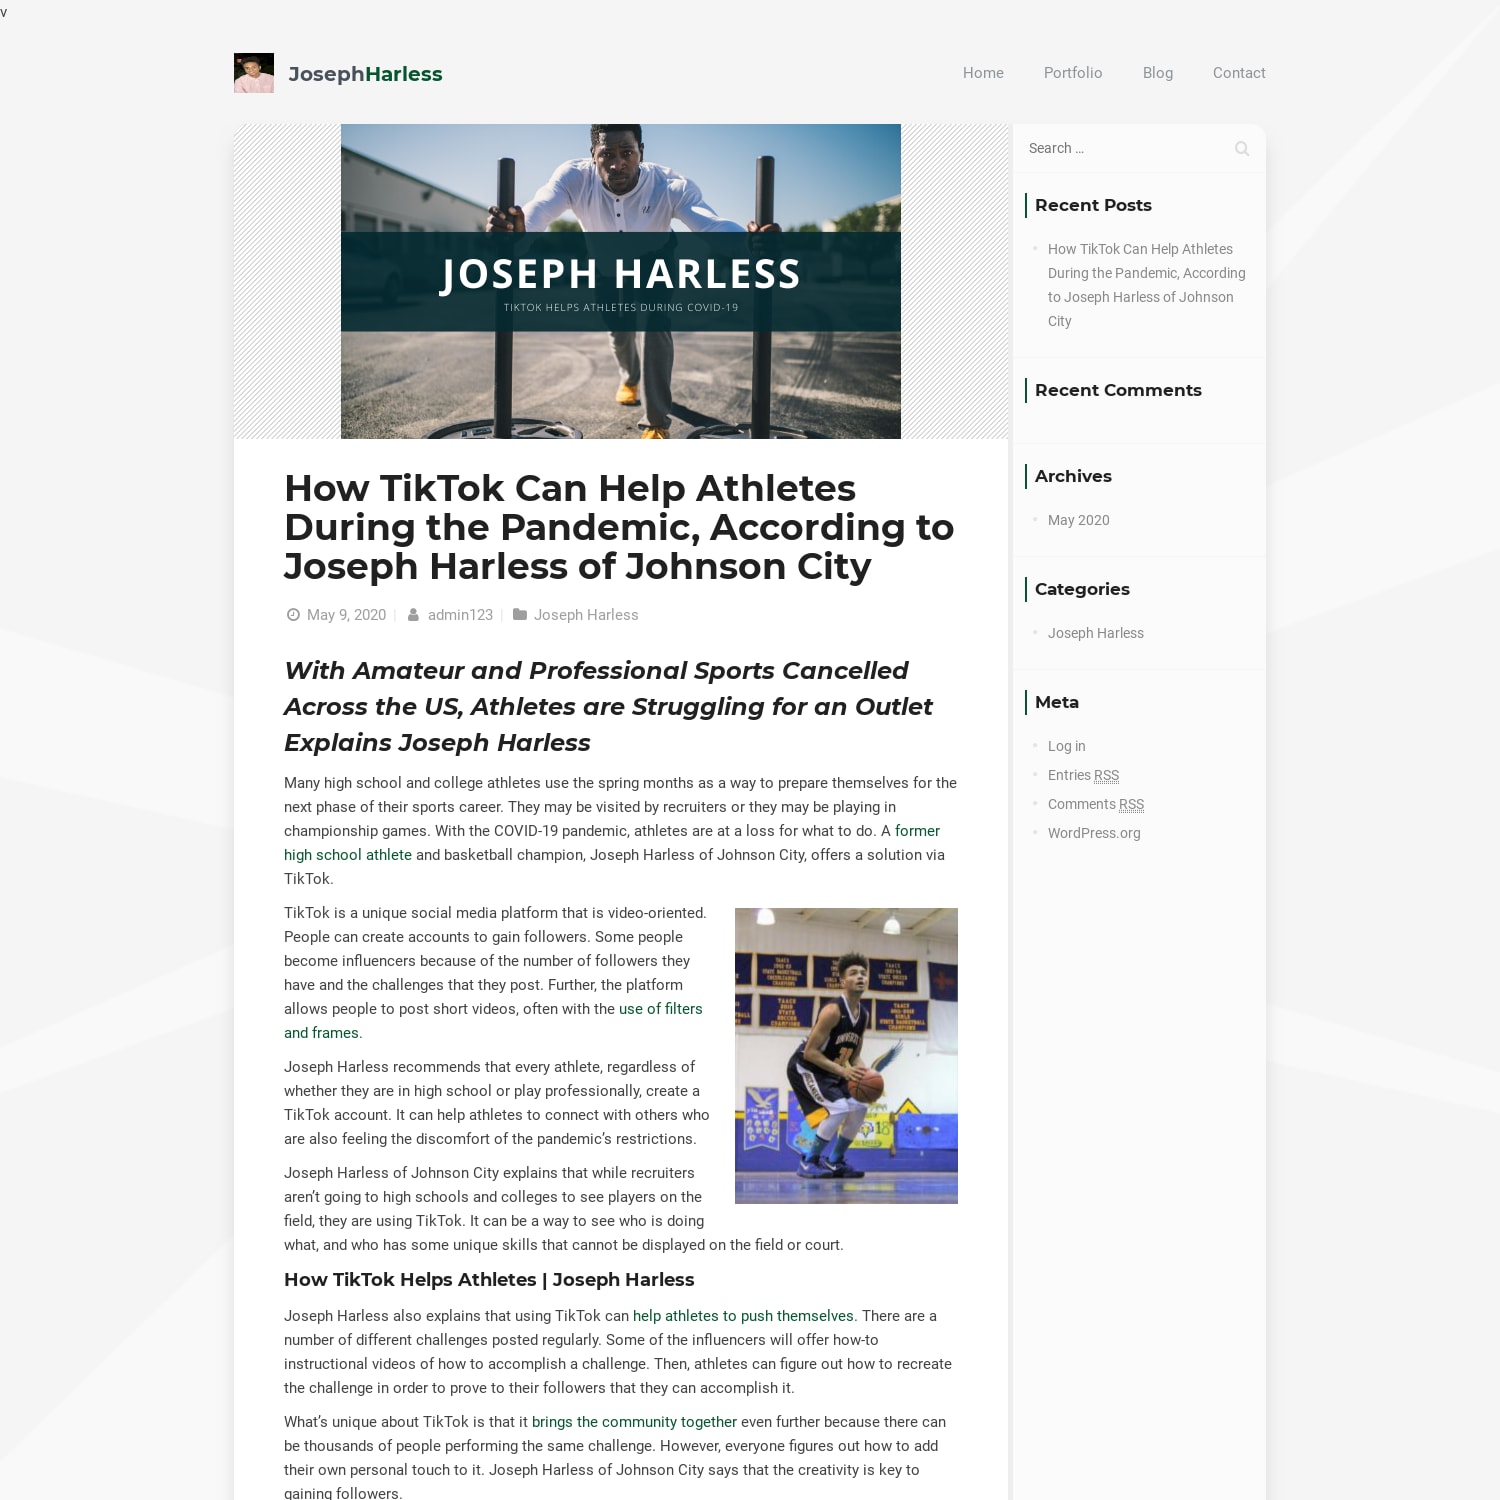 How TikTok Can Help Athletes During the Pandemic, According to Joseph Harless of Johnson City